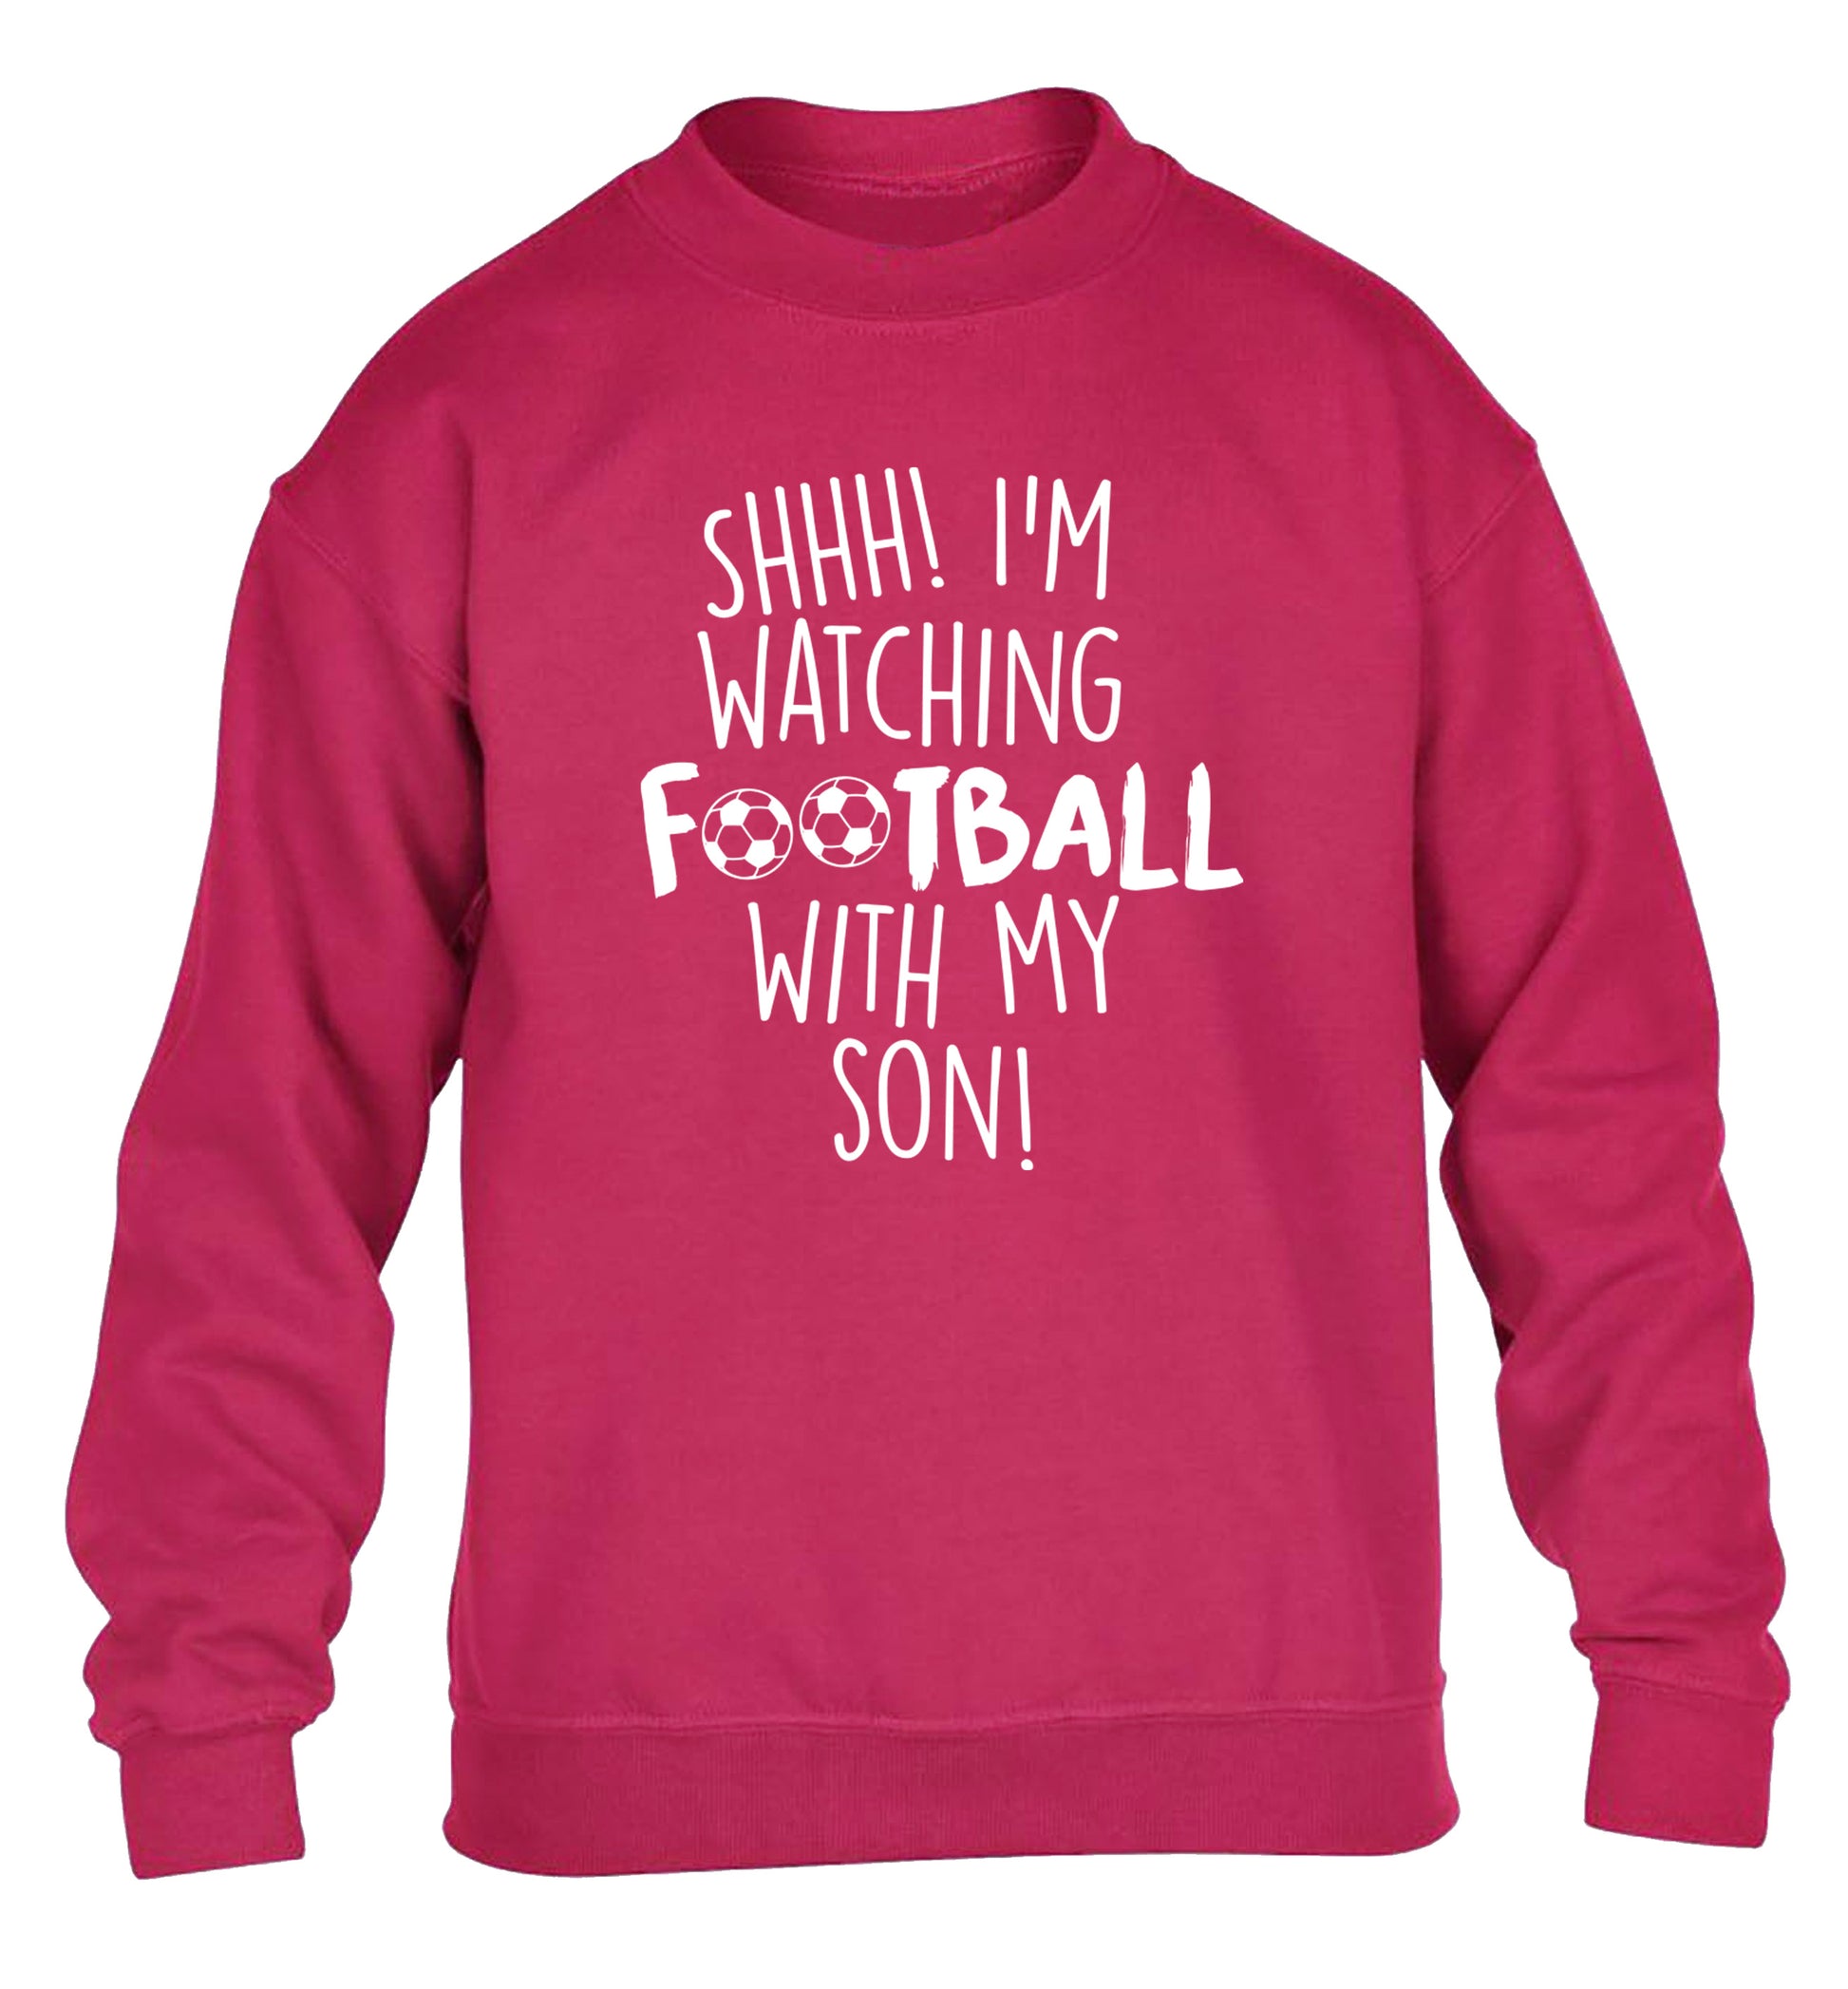 Shhh I'm watching football with my son children's pink sweater 12-14 Years